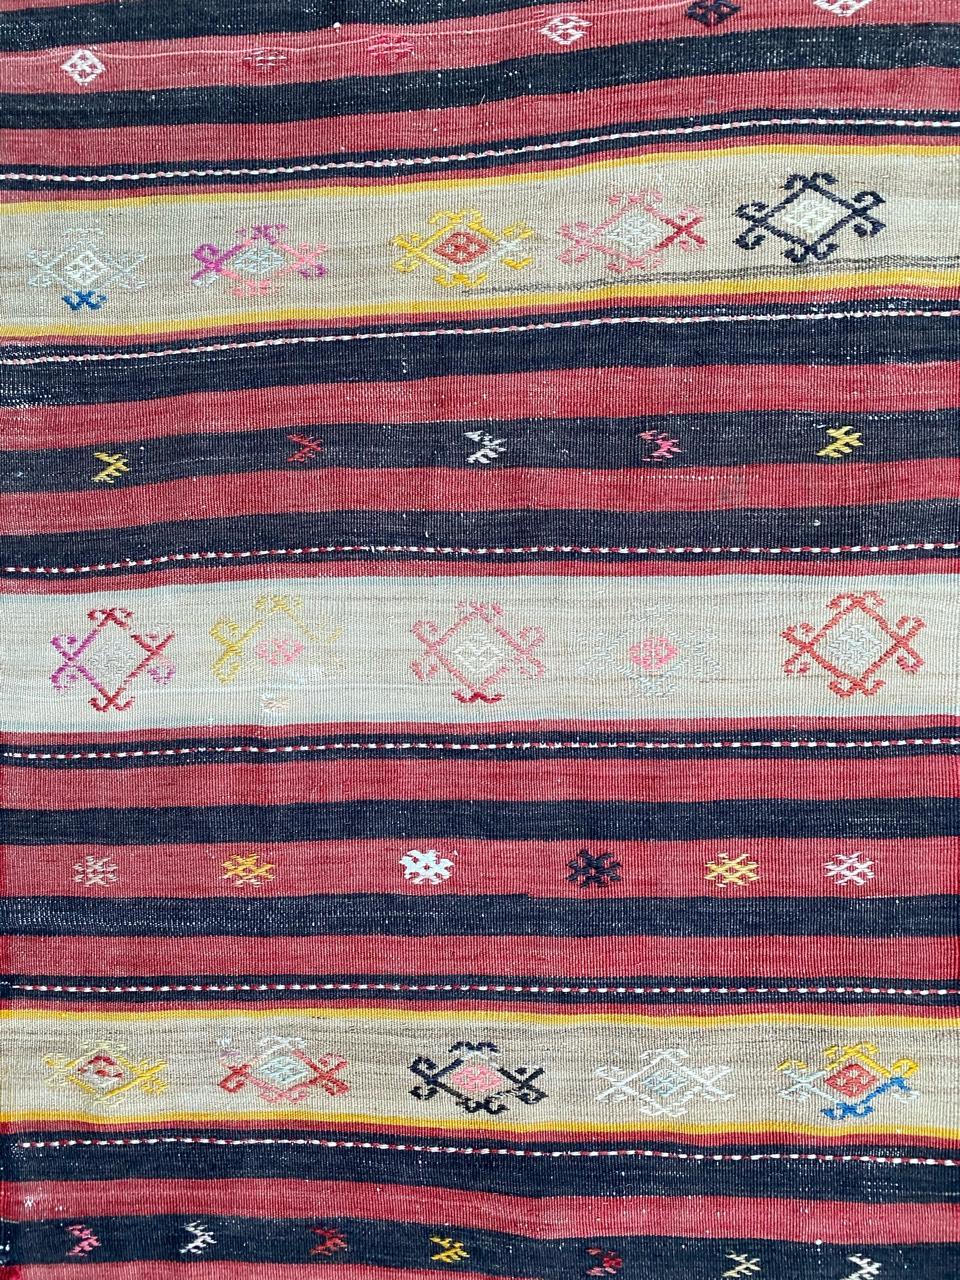 Beautiful Kilim with a tribal design and beautiful colors with red, brown, blue, orange and pink, entirely handwoven with wool on cotton.

✨✨✨
